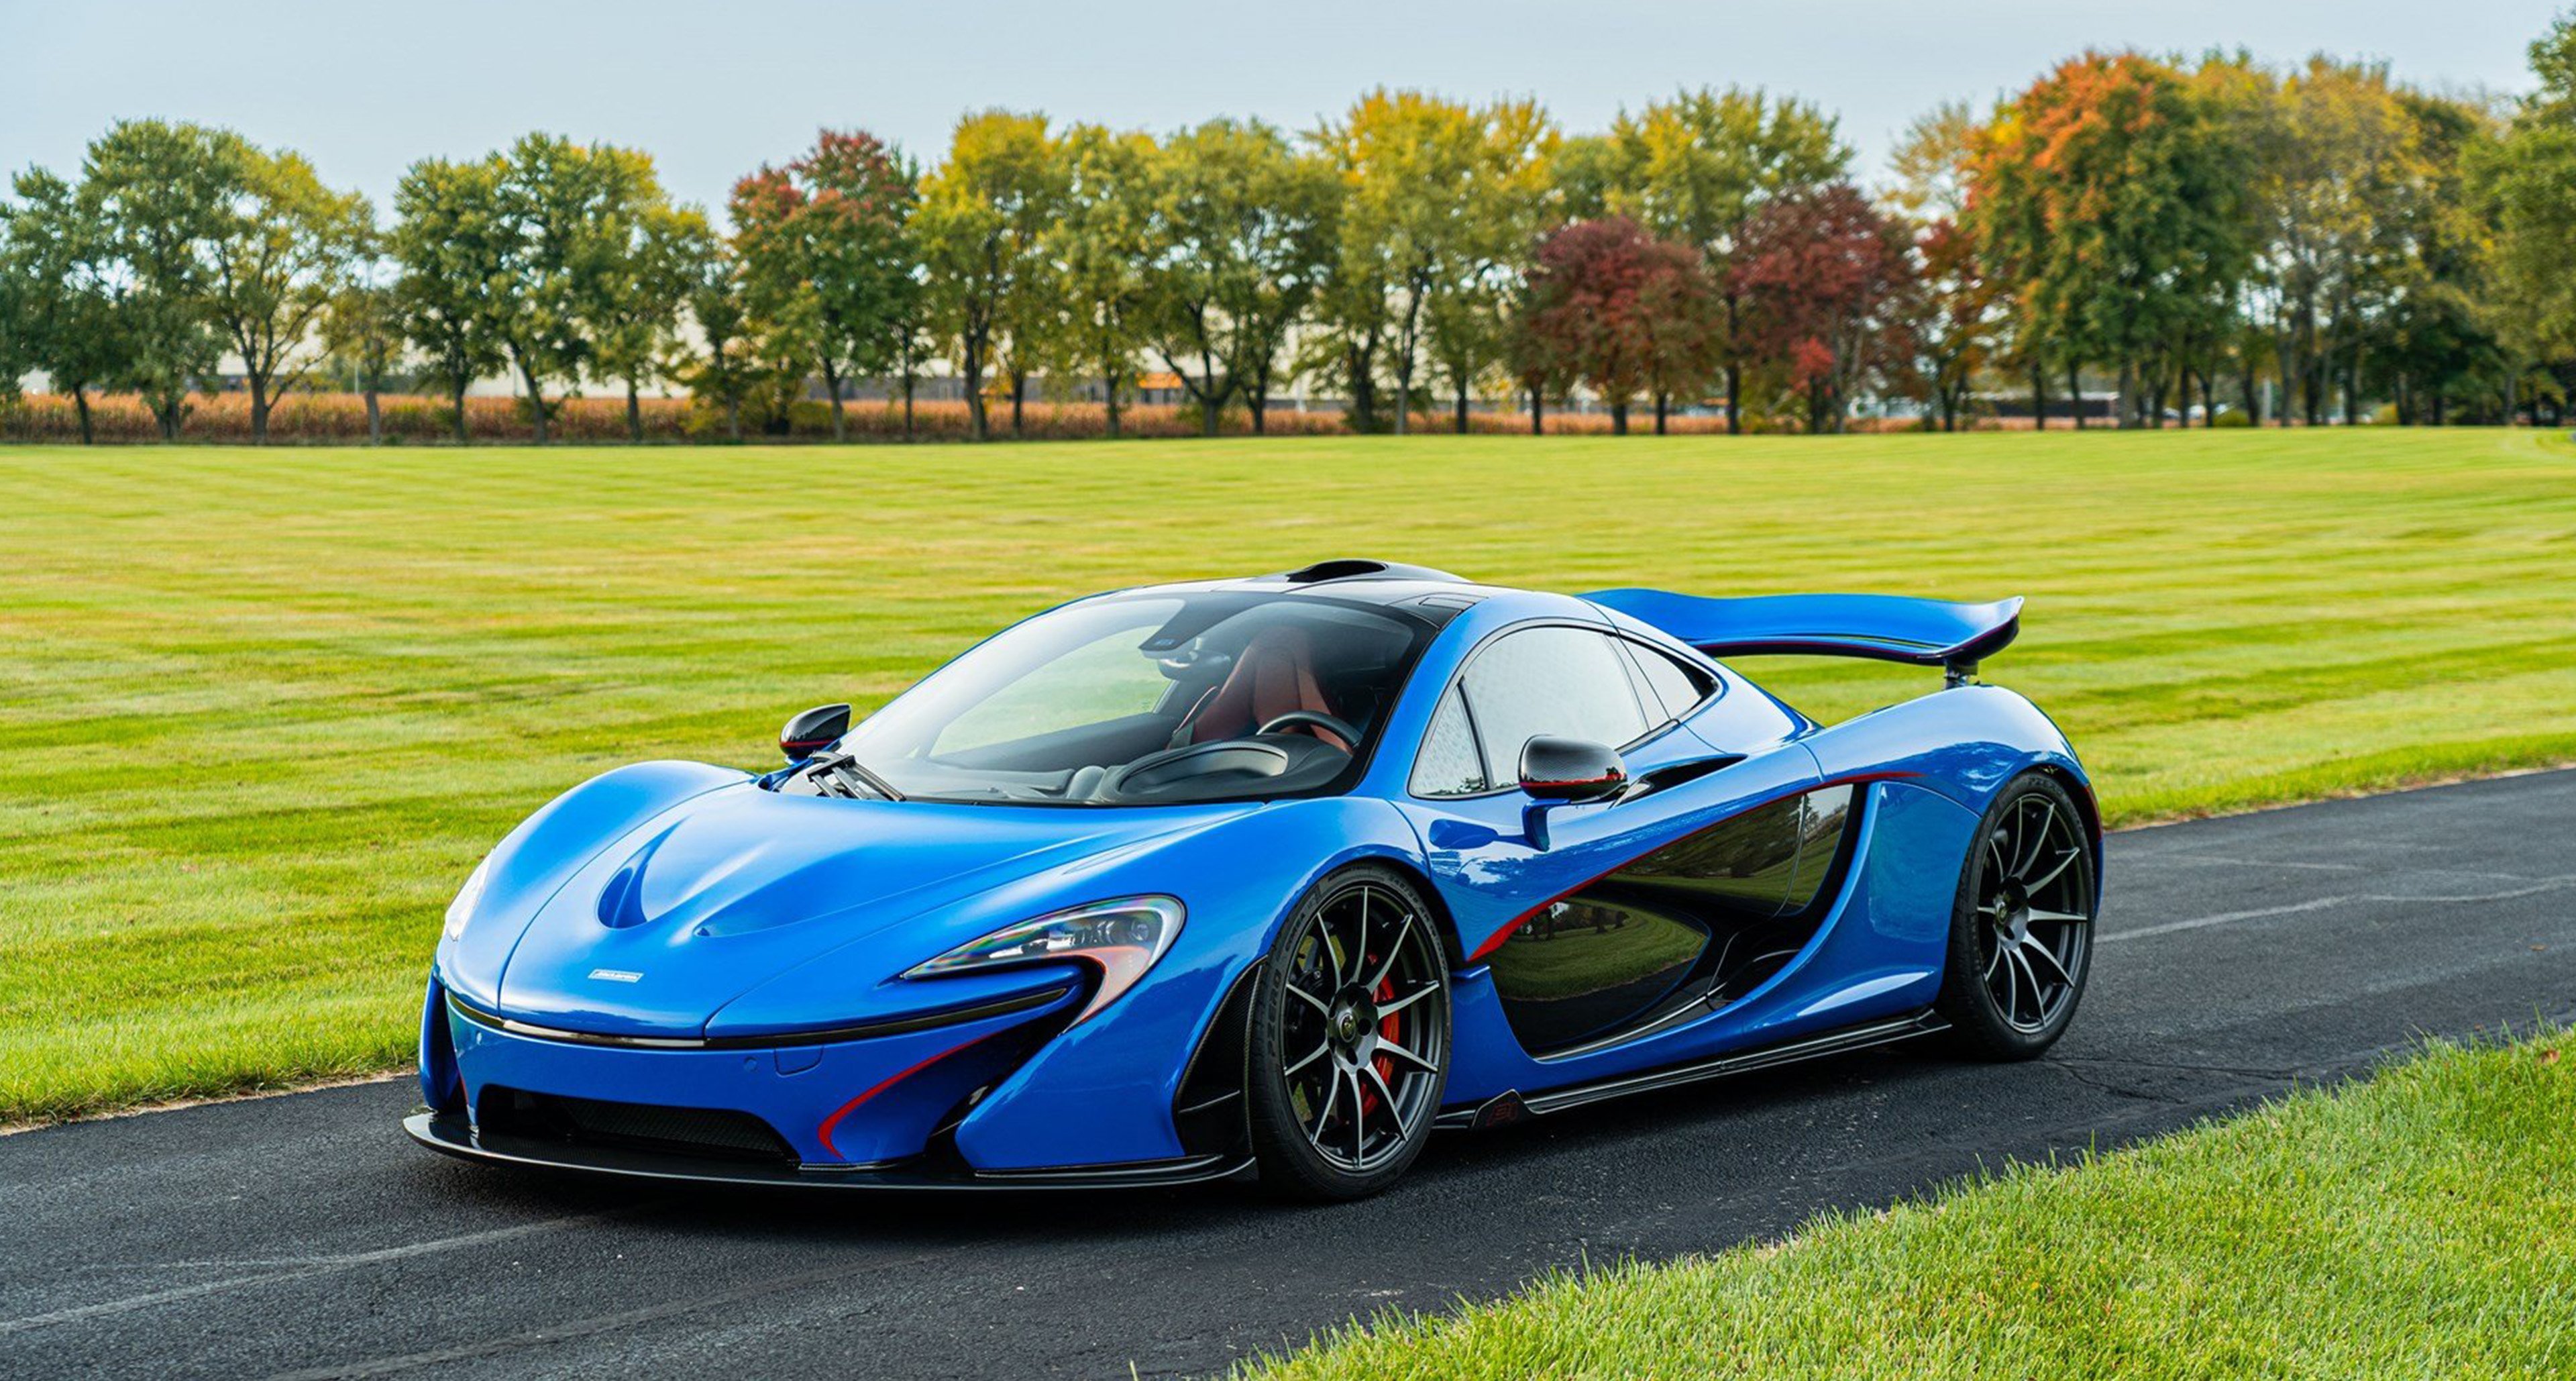 The Professor is a McLaren P1 that teaches you the meaning of speed